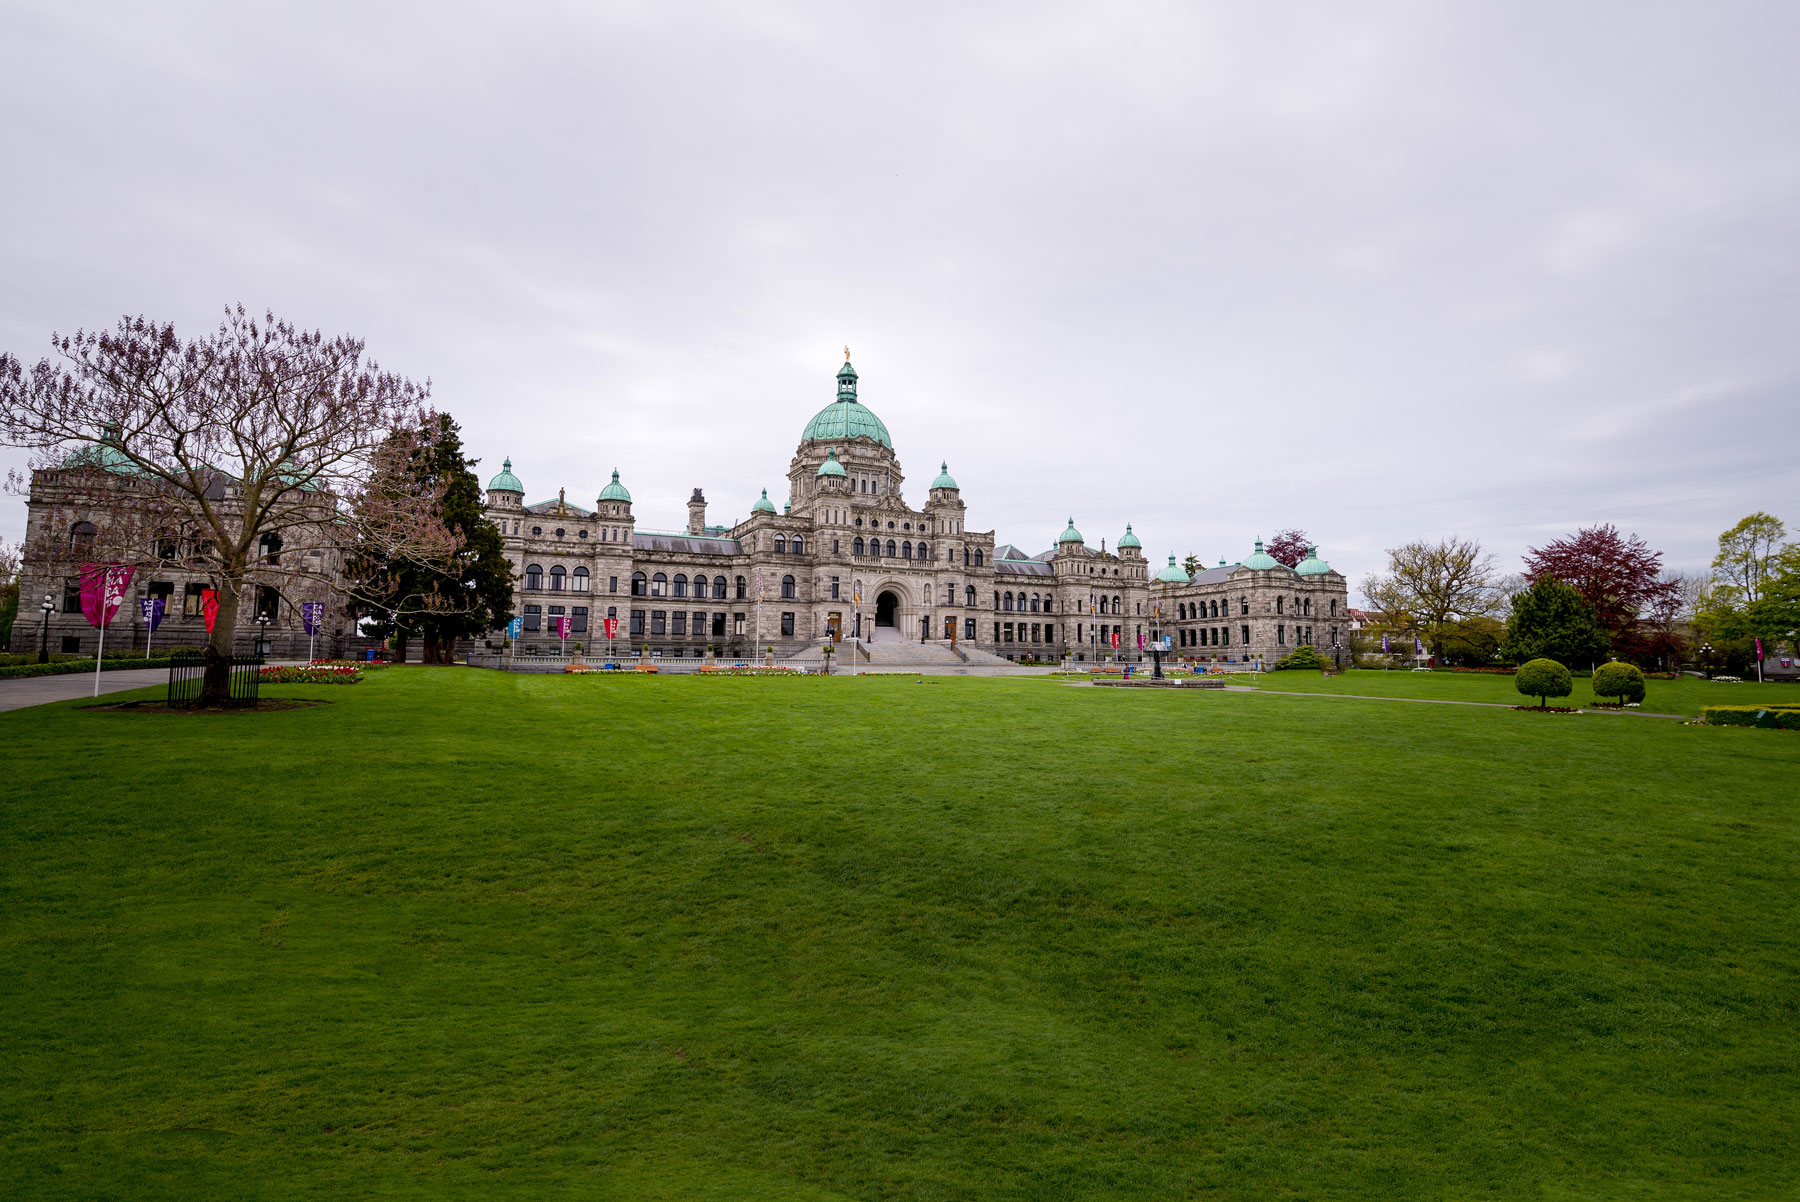 Image of the grass in front of the Legislative Assembly building, grey sky